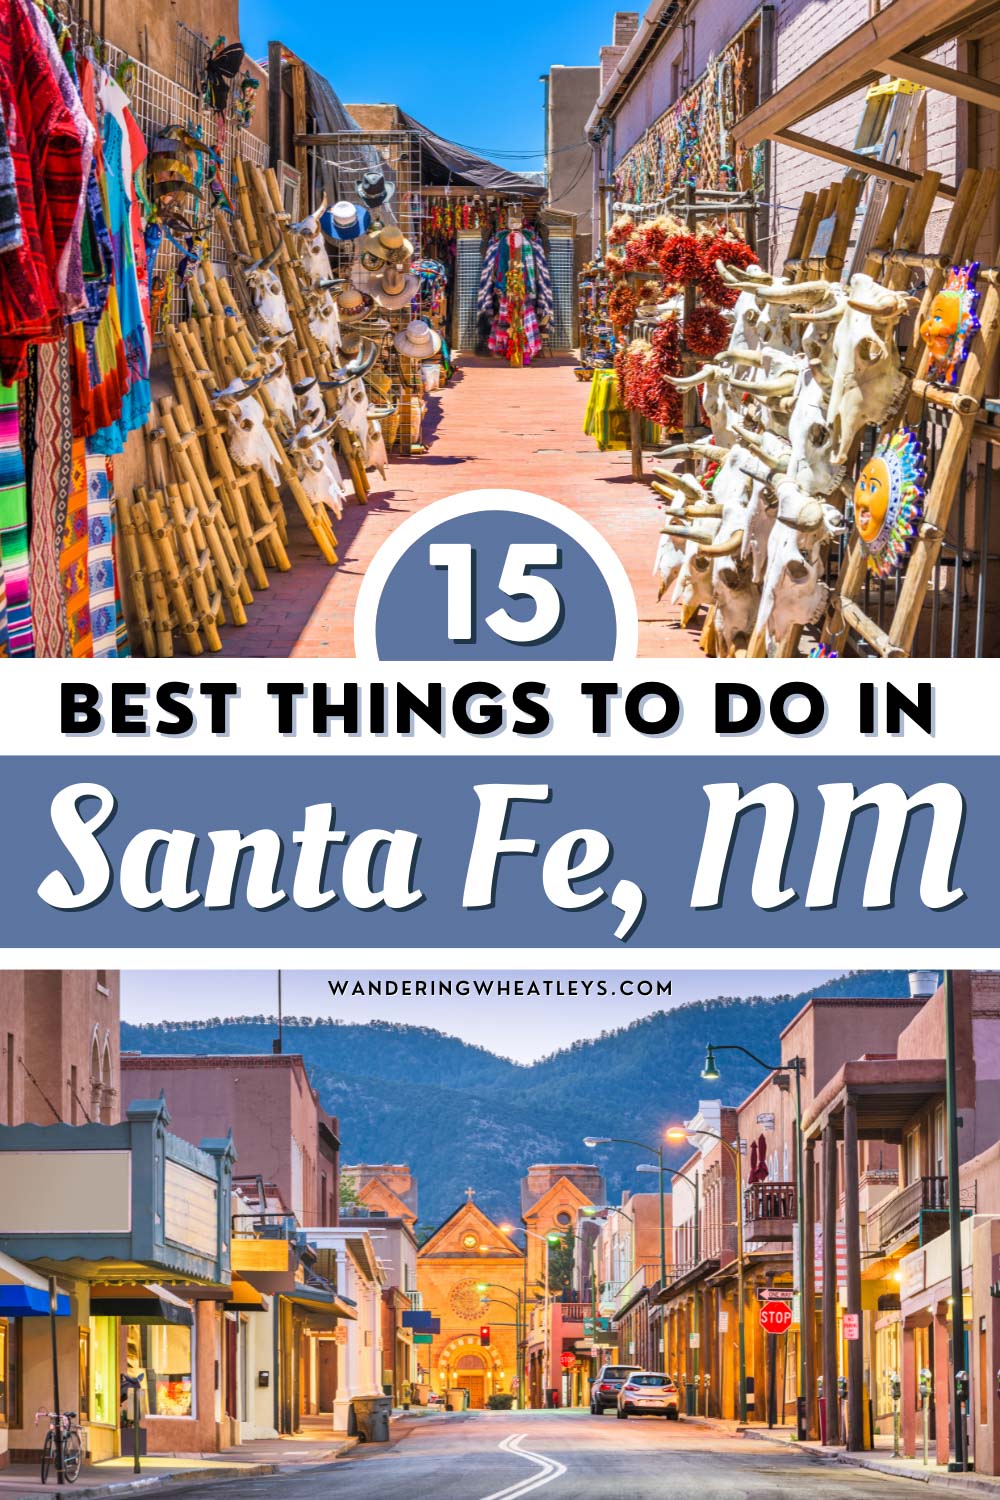 The Best Things to do in Santa Fe